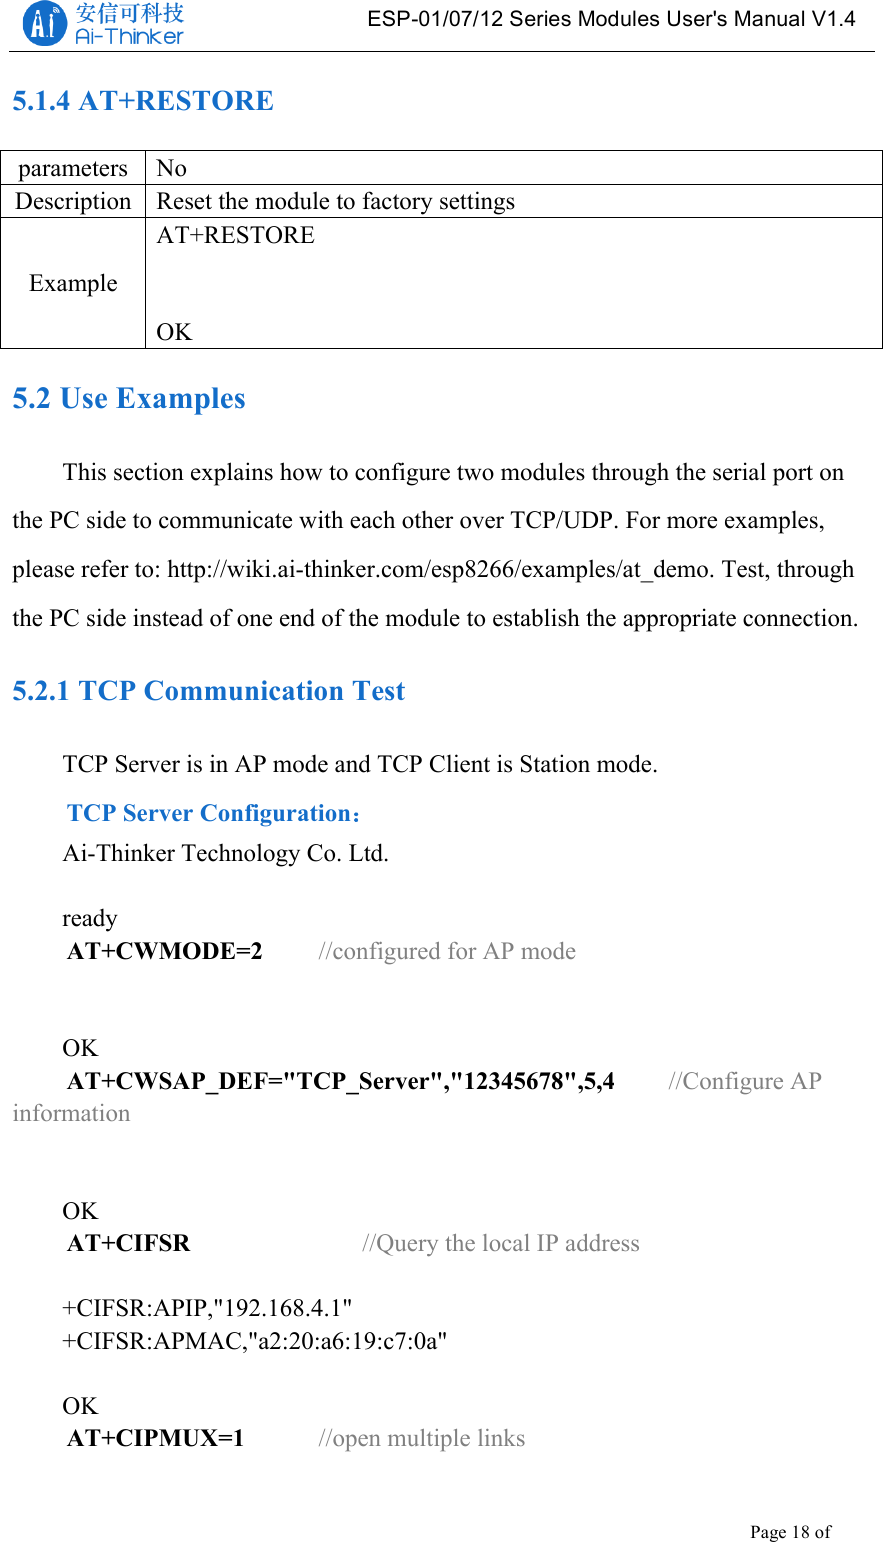   ESP-01/07/12 Series Modules User&apos;s Manual V1.4 Copyright © 2017 Shenzhen Ai-Thinker Technology Co., Ltd All Rights Reserved Page 18 of 23   5.1.4 AT+RESTORE parameters No Description Reset the module to factory settings Example AT+RESTORE   OK 5.2 Use Examples This section explains how to configure two modules through the serial port on the PC side to communicate with each other over TCP/UDP. For more examples, please refer to: http://wiki.ai-thinker.com/esp8266/examples/at_demo. Test, through the PC side instead of one end of the module to establish the appropriate connection. 5.2.1 TCP Communication Test TCP Server is in AP mode and TCP Client is Station mode. TCP Server Configuration： Ai-Thinker Technology Co. Ltd.  ready AT+CWMODE=2    //configured for AP mode   OK AT+CWSAP_DEF=&quot;TCP_Server&quot;,&quot;12345678&quot;,5,4   //Configure AP information   OK AT+CIFSR        //Query the local IP address  +CIFSR:APIP,&quot;192.168.4.1&quot; +CIFSR:APMAC,&quot;a2:20:a6:19:c7:0a&quot;  OK AT+CIPMUX=1    //open multiple links  